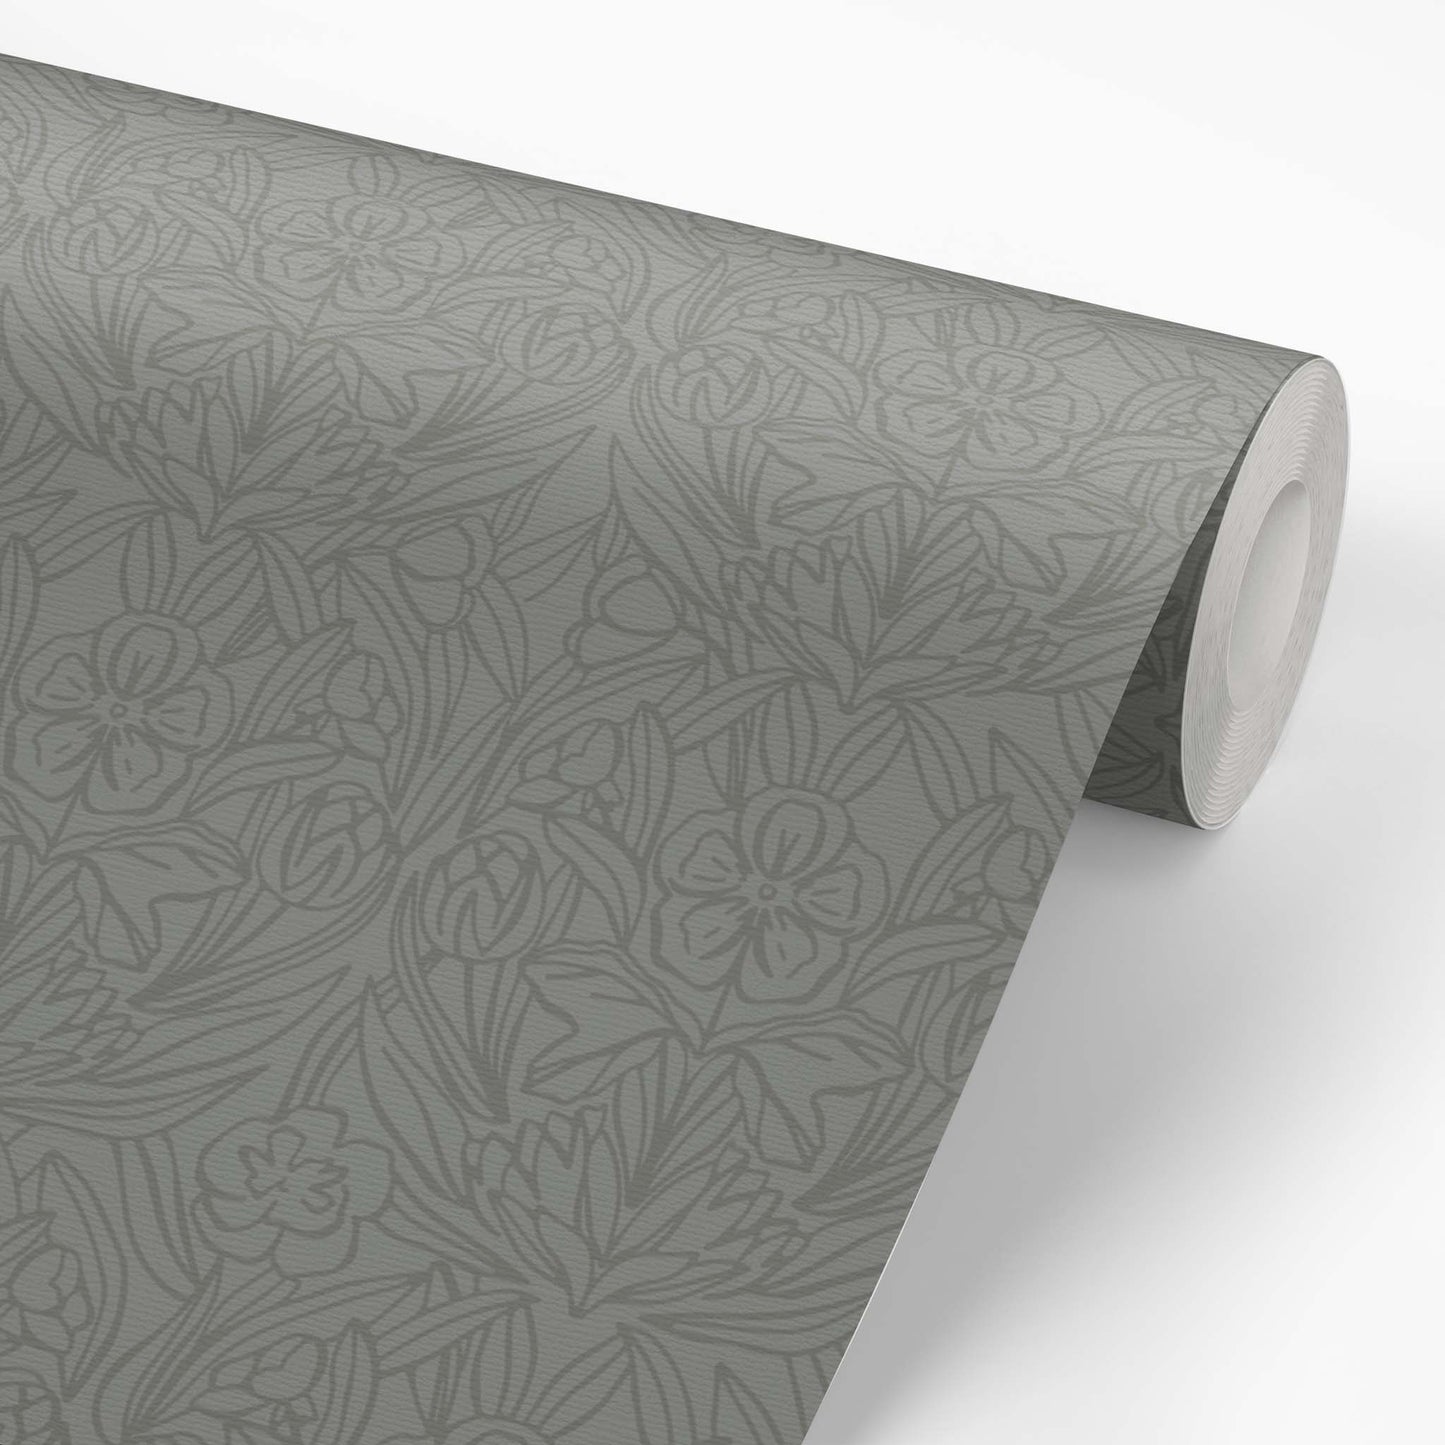 Featuring a subtle combination of florals, this green wallpaper adds a touch of elegance shown on a wallpaper roll.